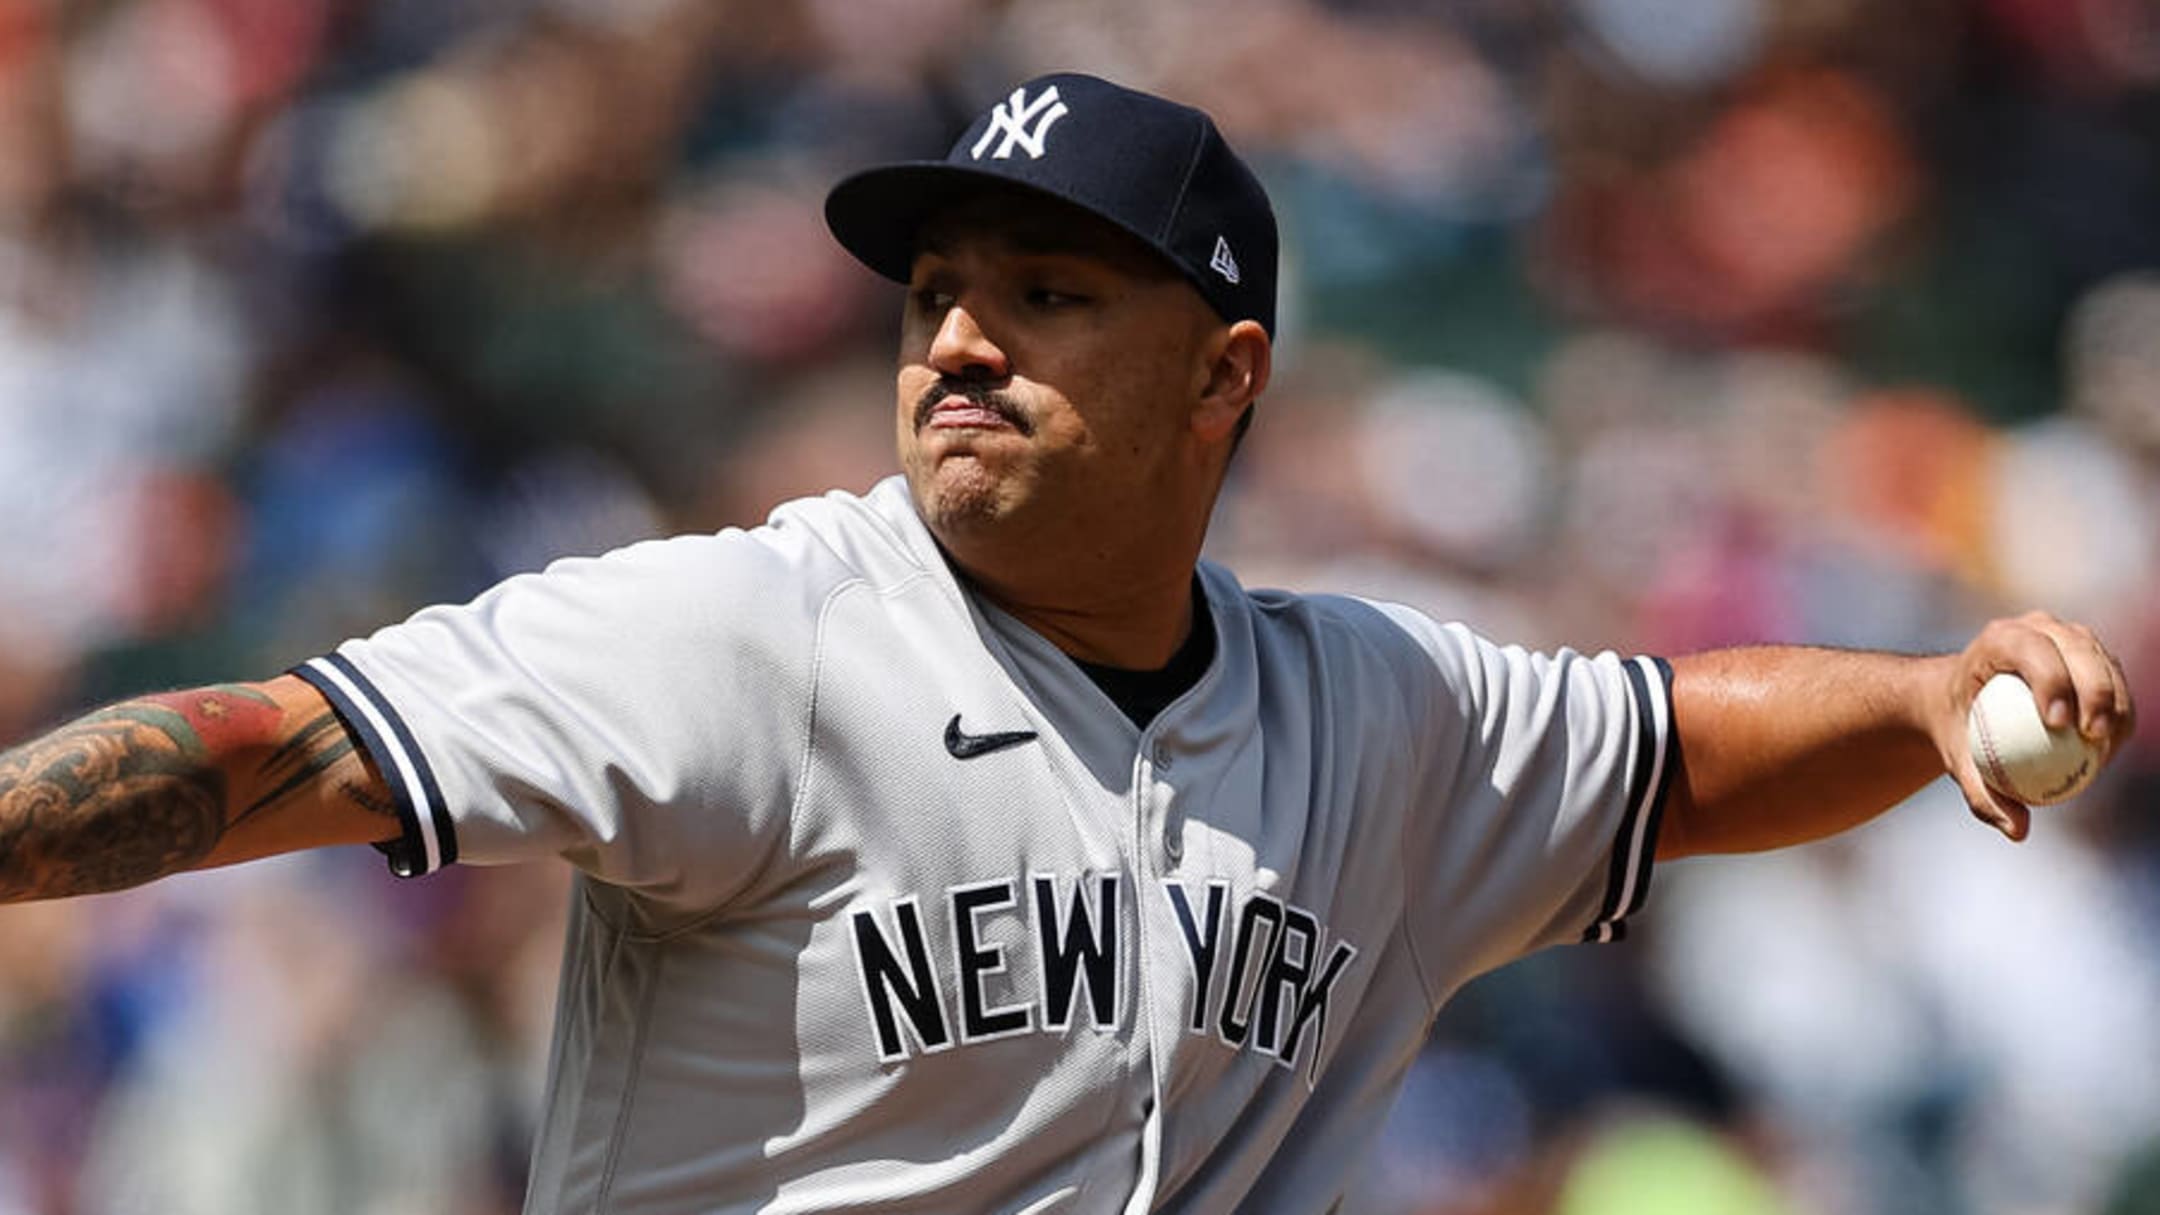 Yankees' Nestor Cortes Addresses Insensitive Remark by Twins